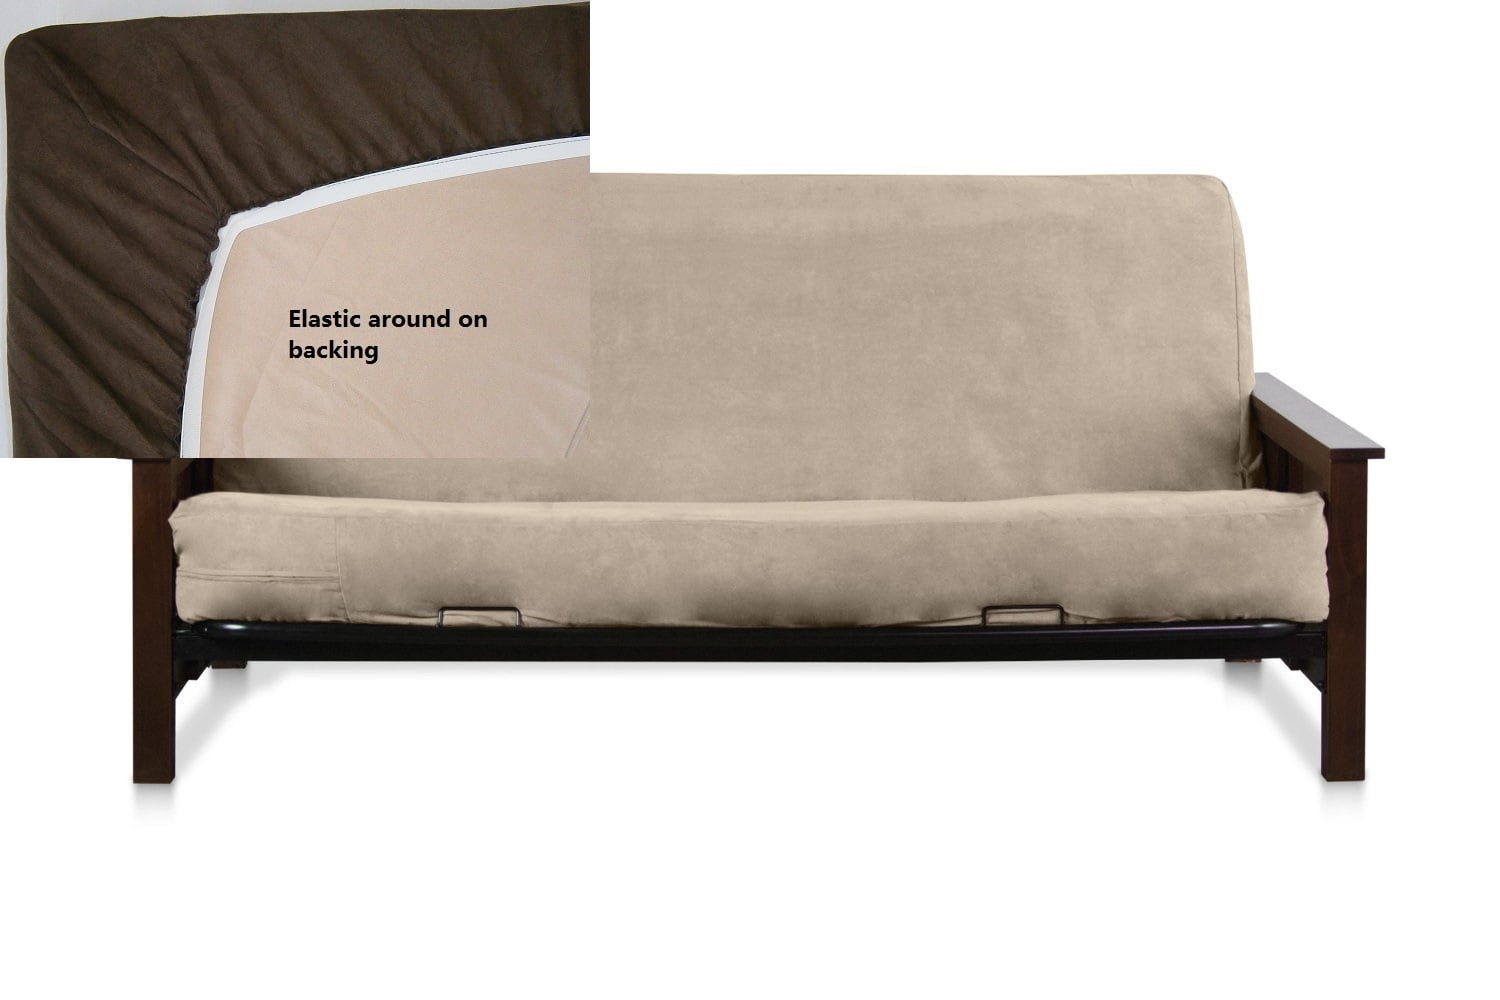 NEW Full Size Bonded Classic Soft Micro Suede Futon Mattress Sofa Bed Peat Best 